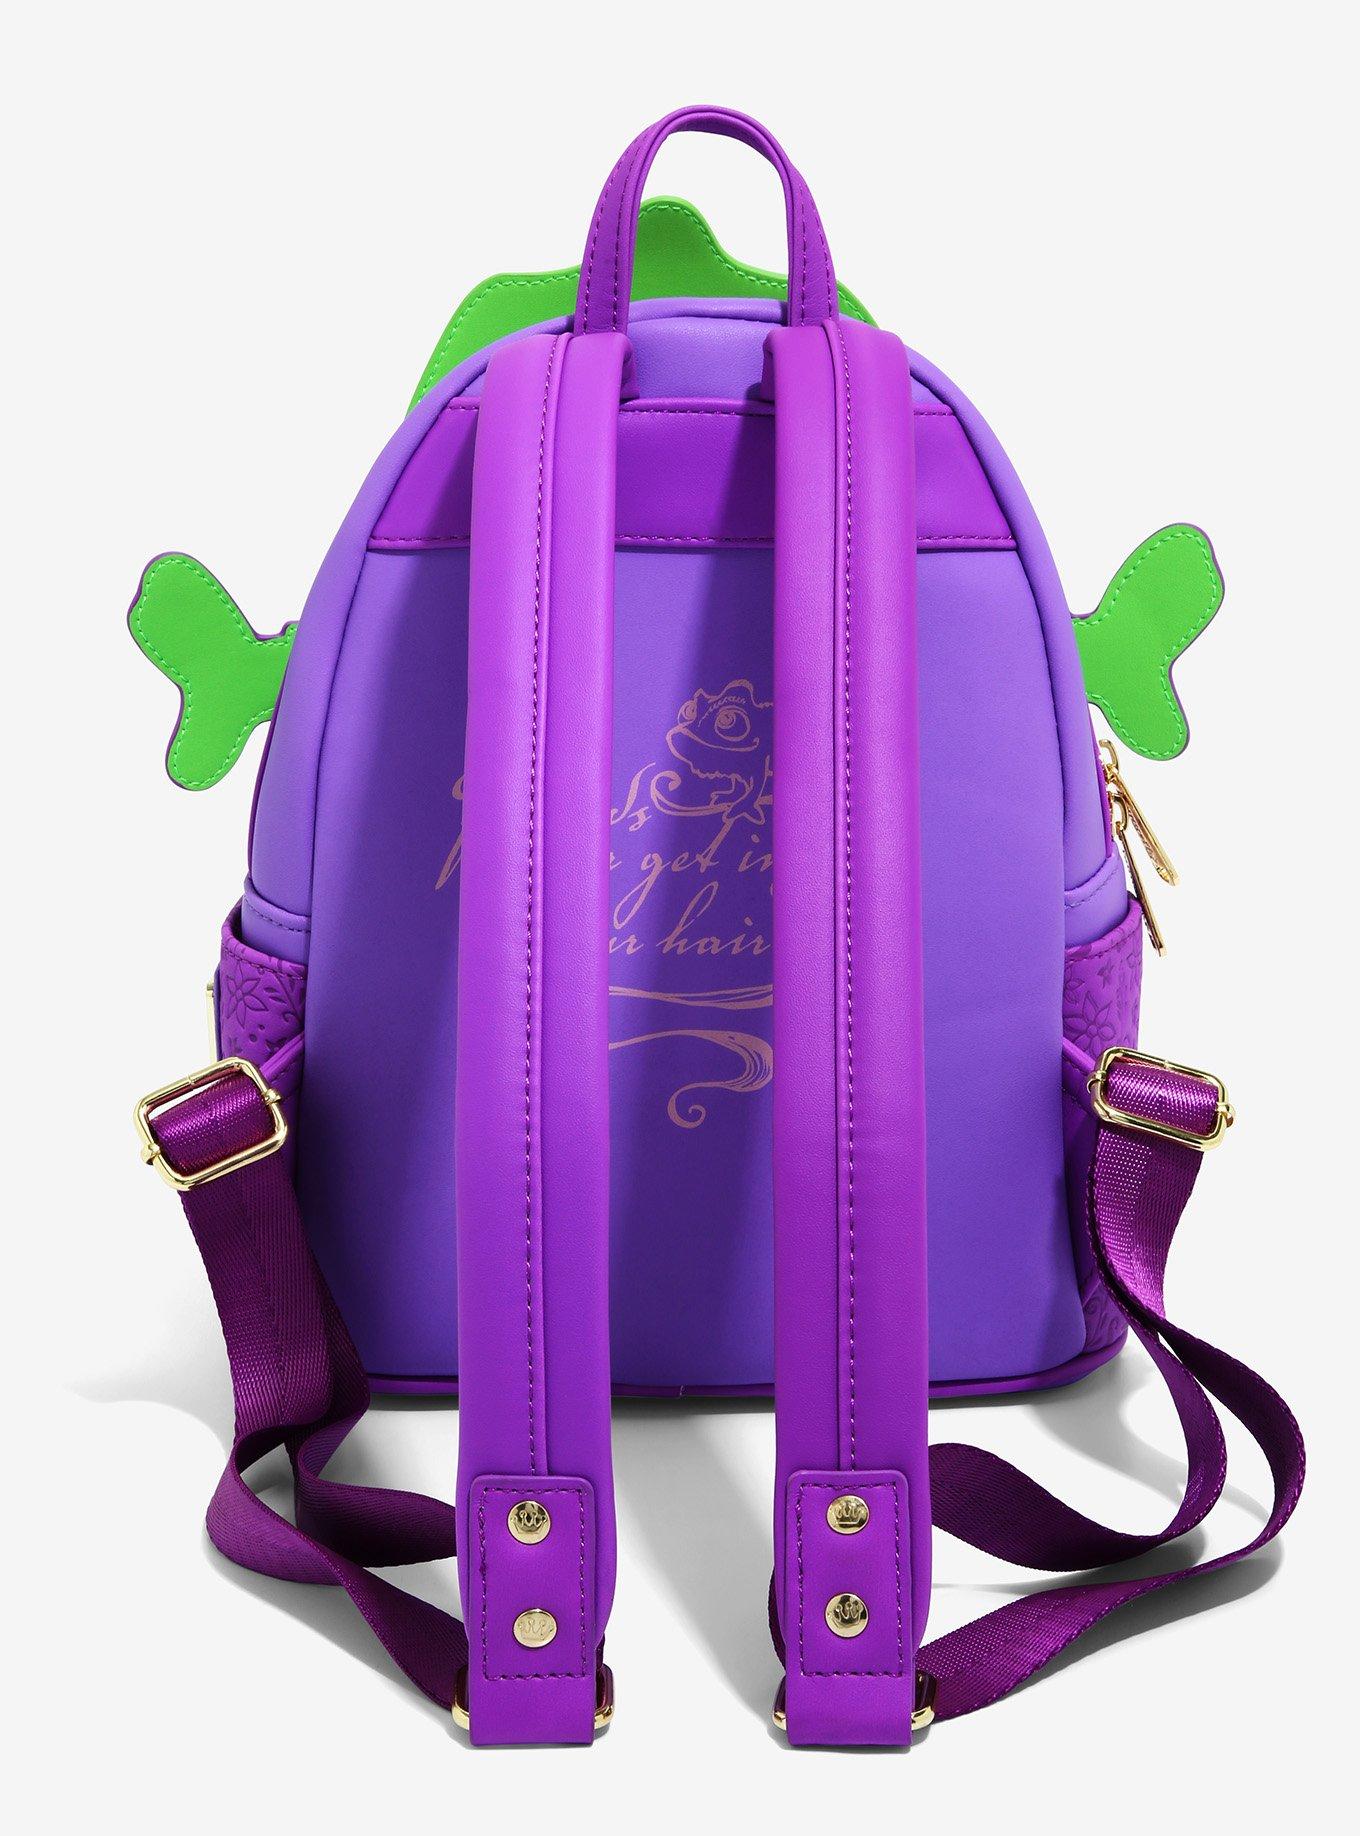 Loungefly Disney Tangled Pascal Sewing Mini Backpack New